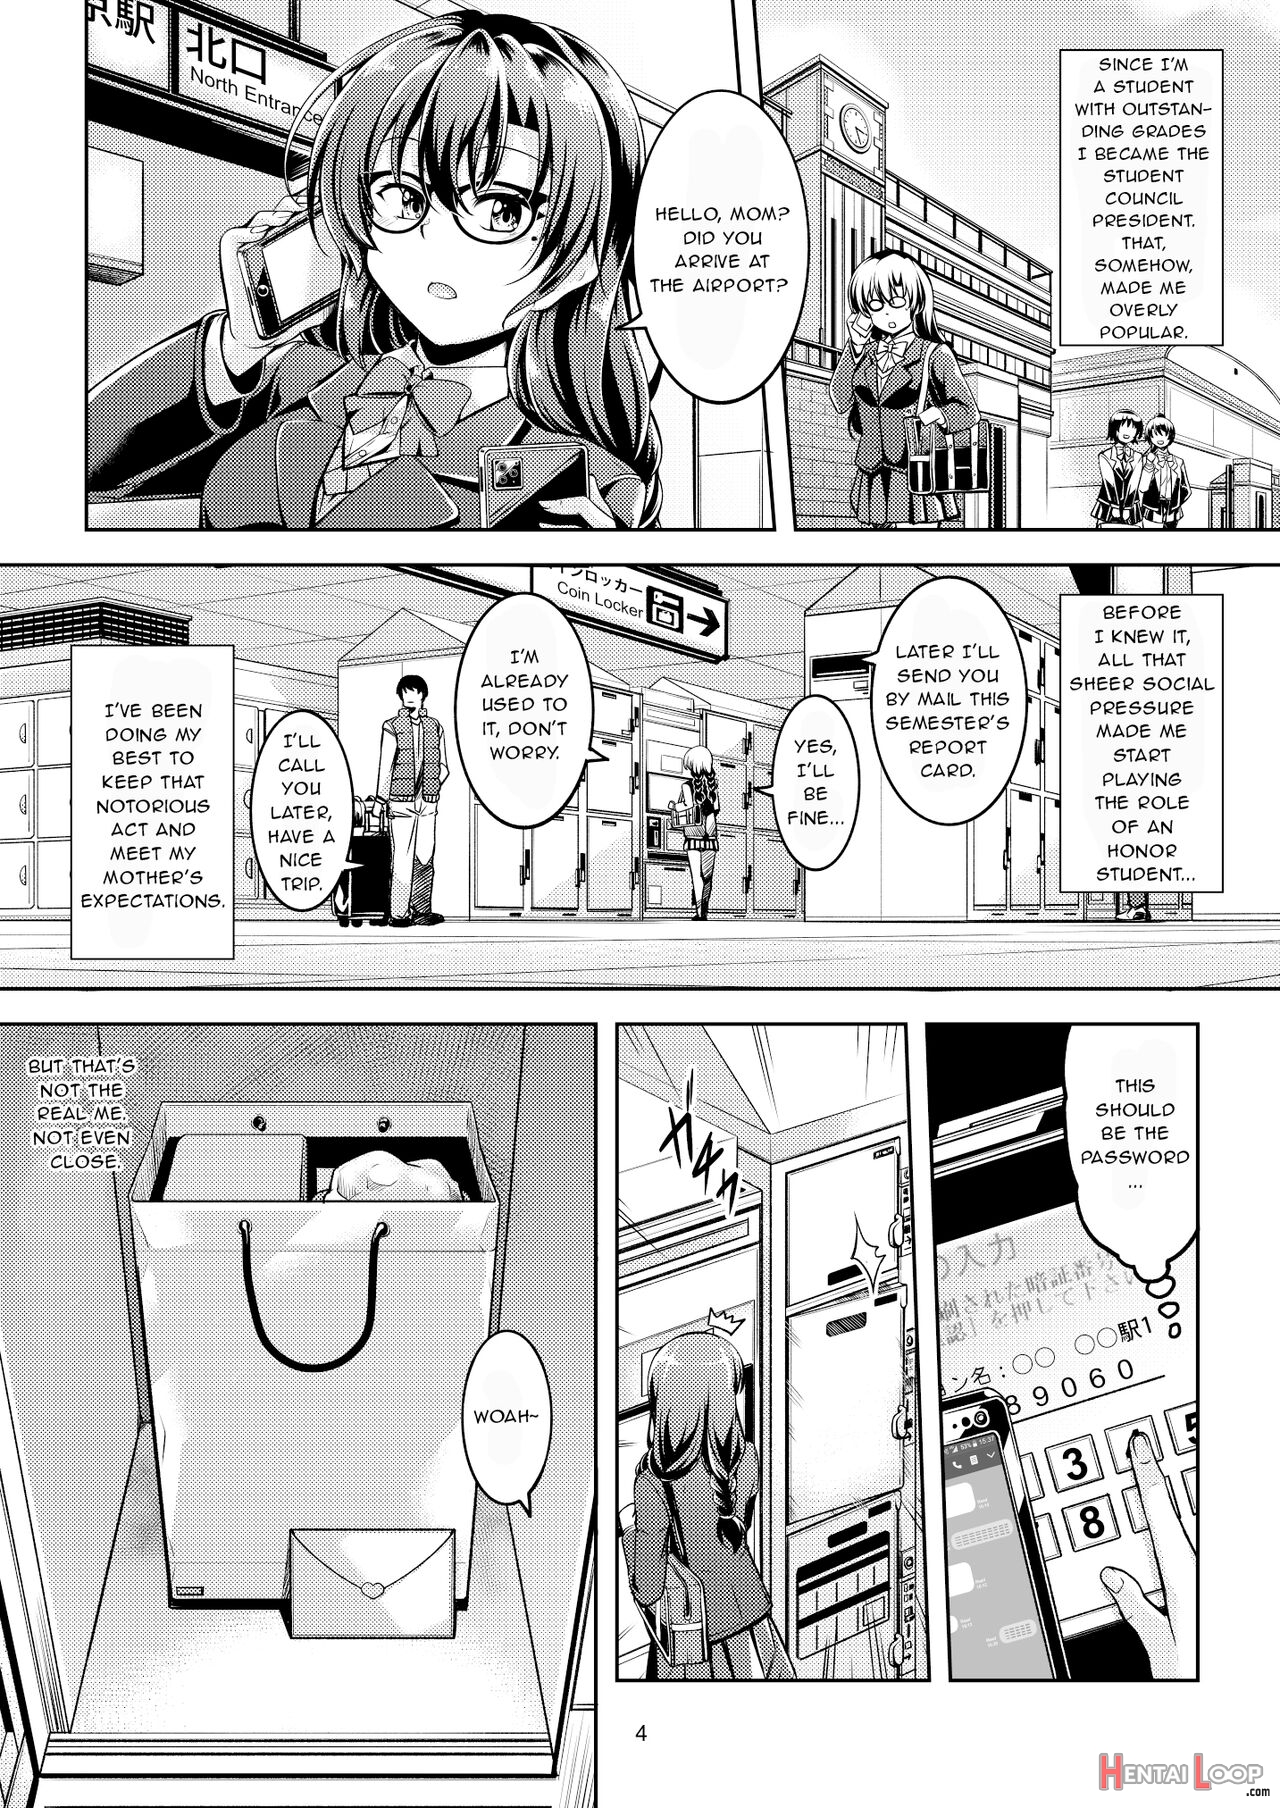 Darkside Streamer Take 1 Blackmail! The Fall Of The Anal Maniac Student Council President -yukino Kanami- page 8